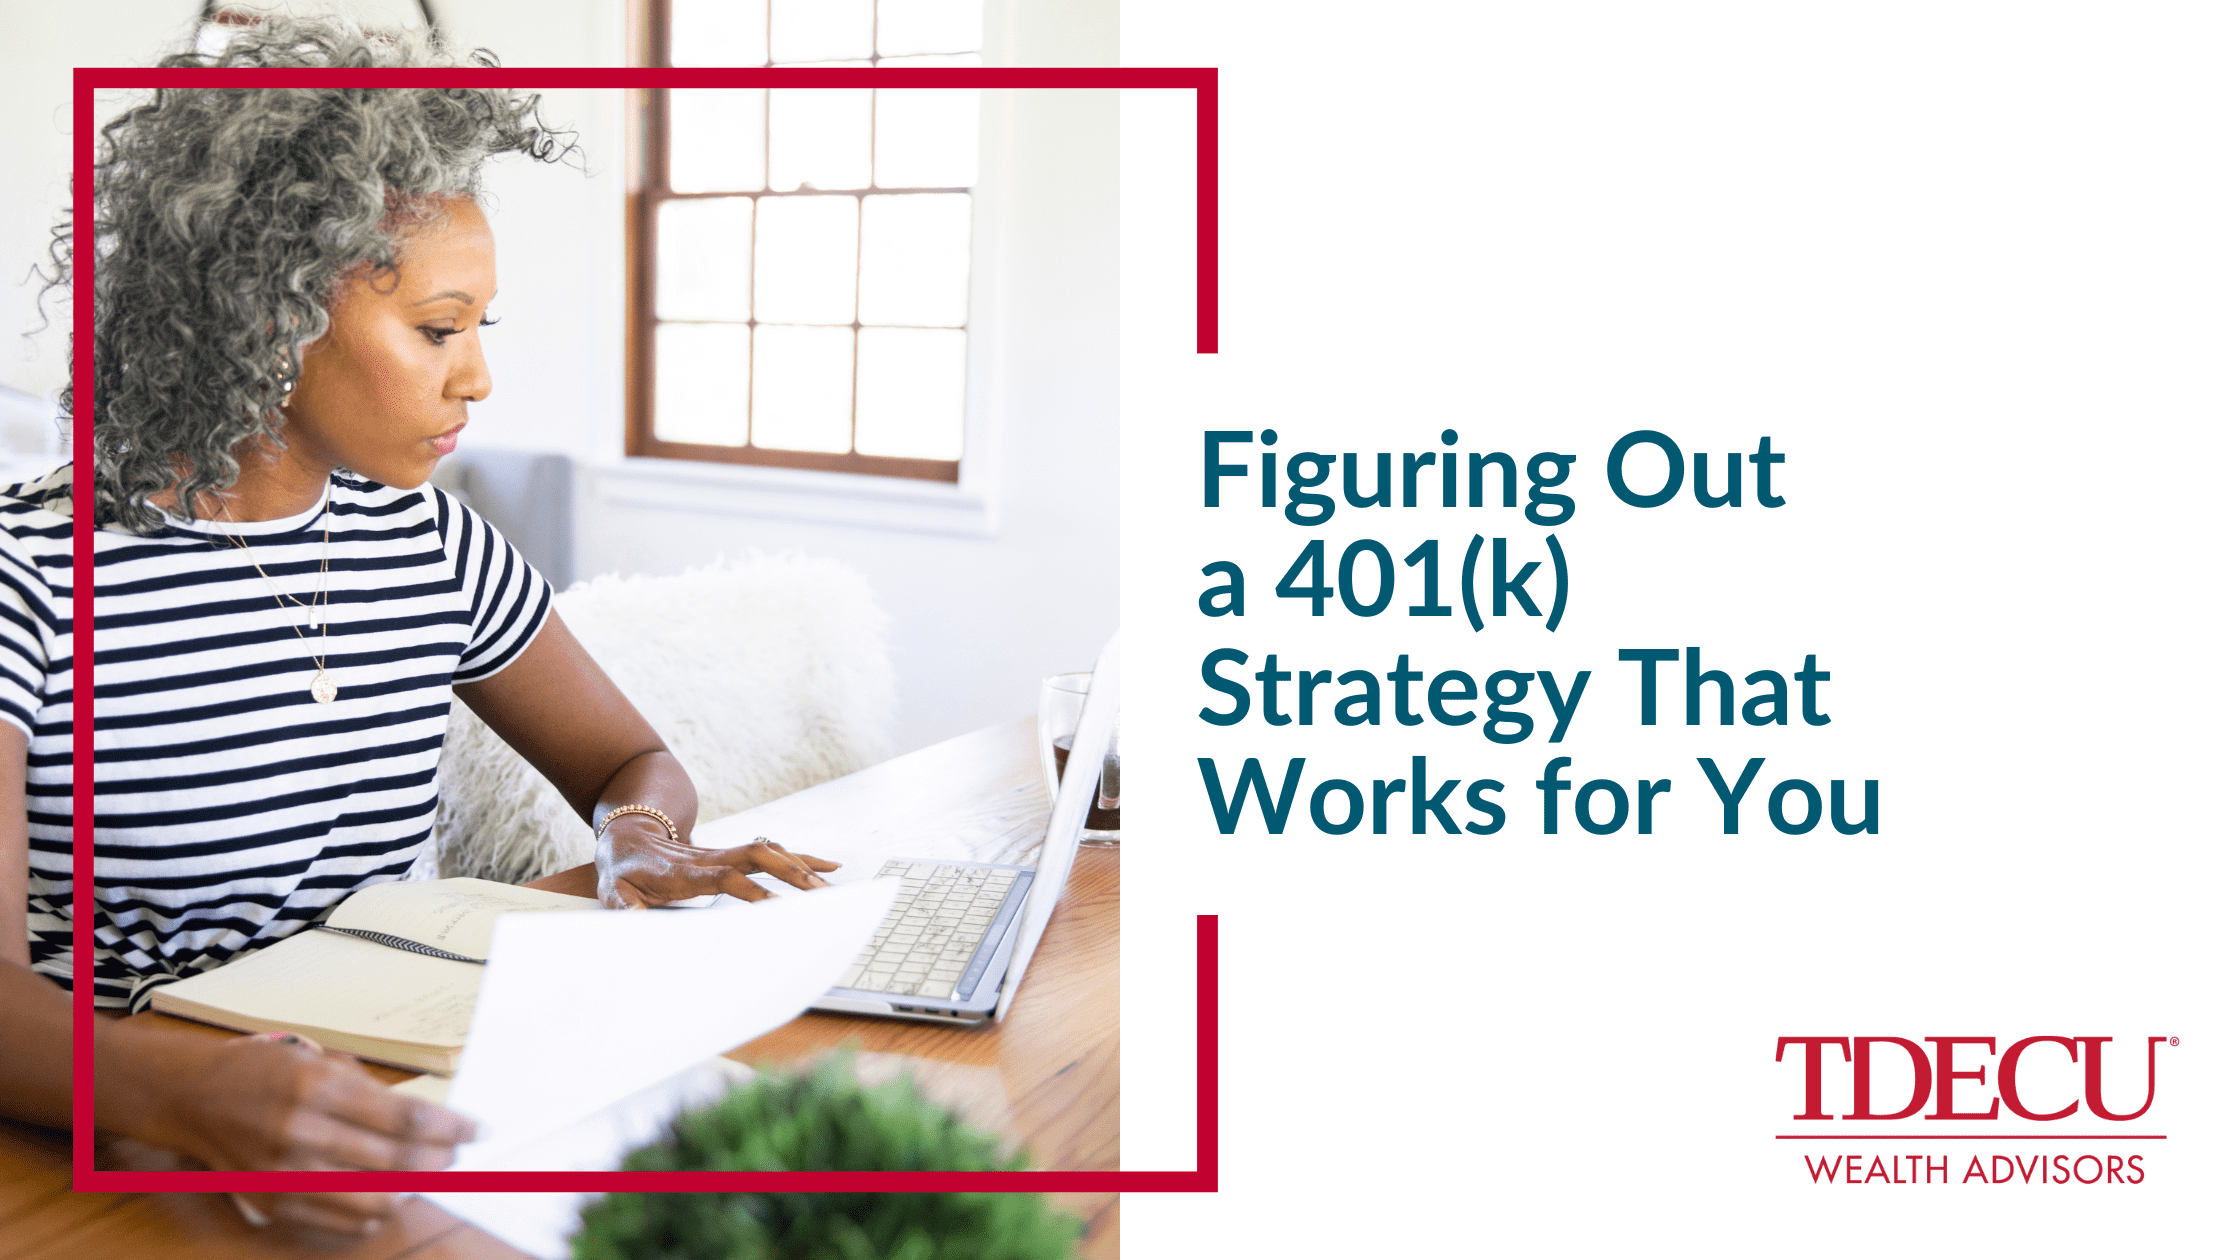 Figuring Out a 401(k) Strategy That Works for You